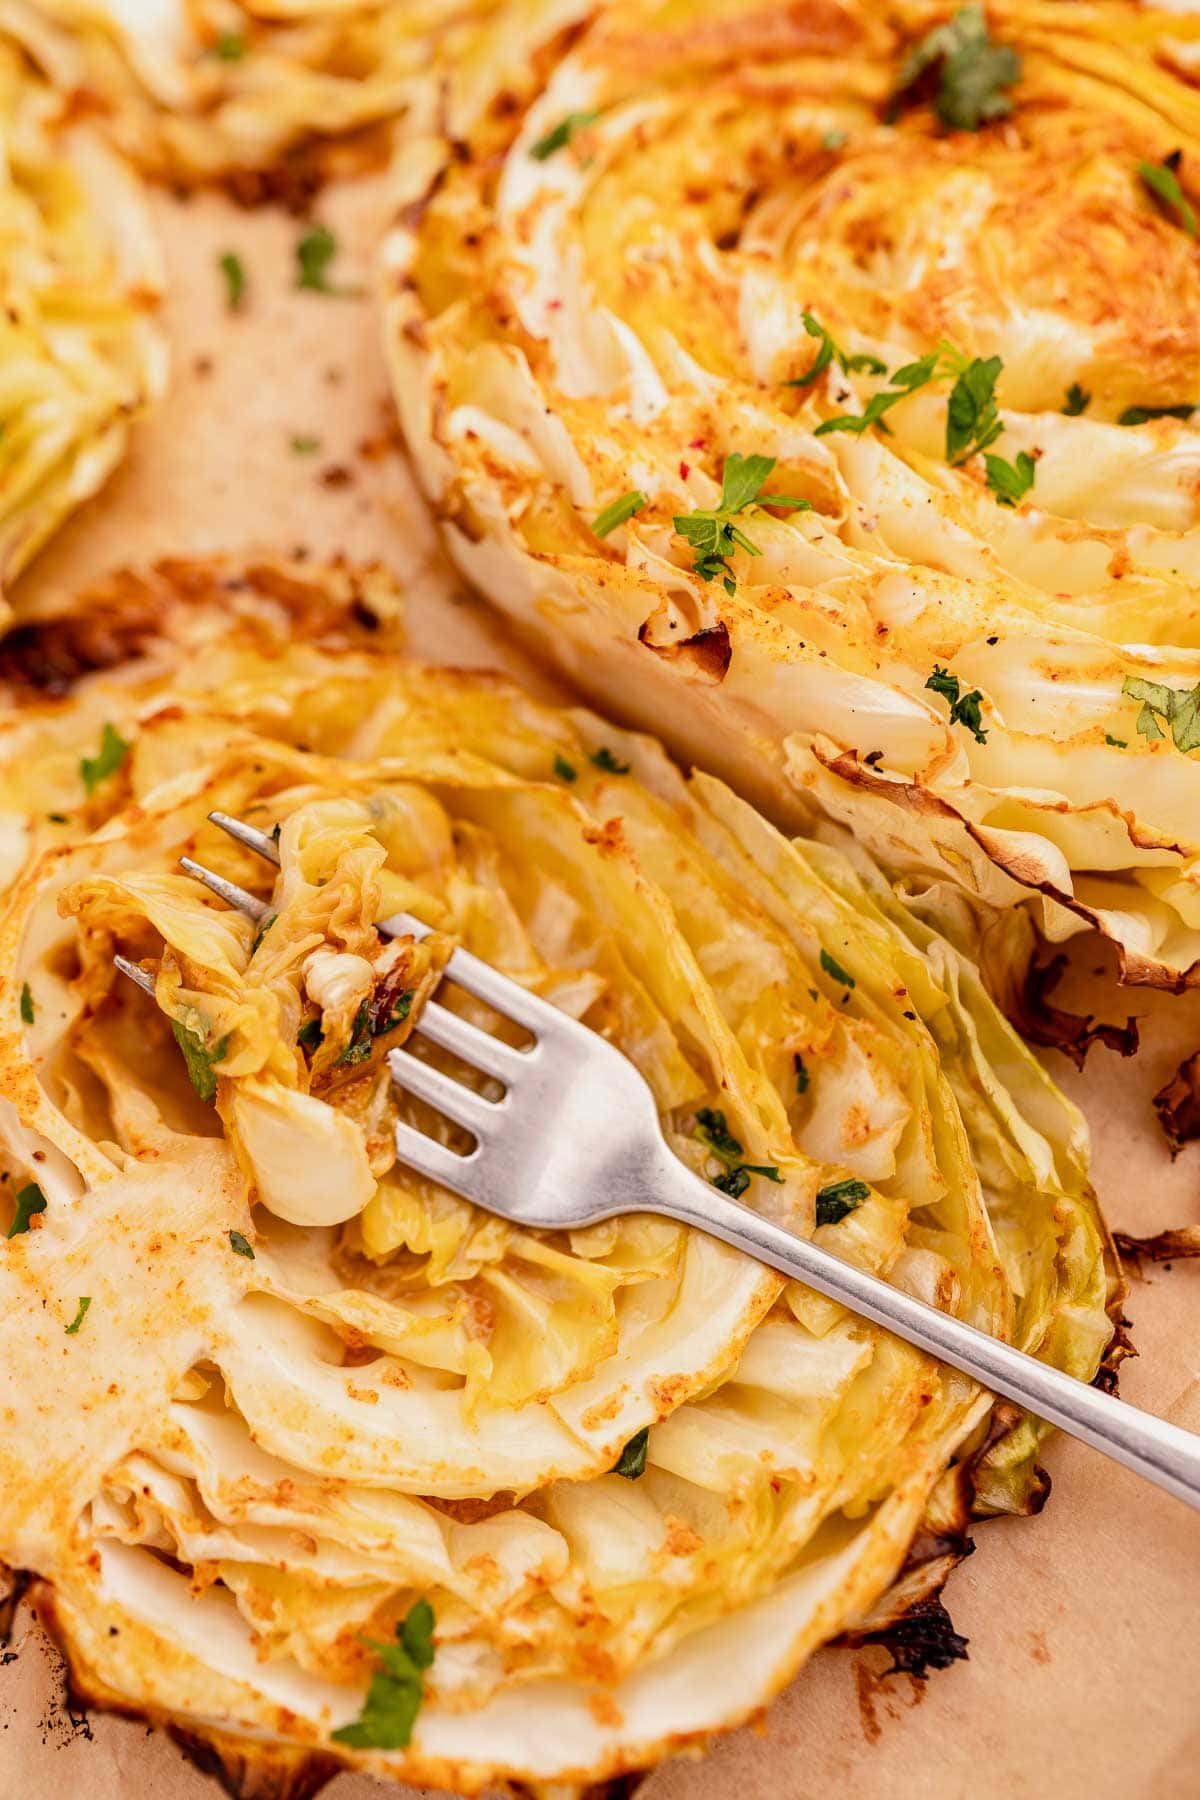 Sliced roasted cabbage steaks garnished with parsley, with a fork on one piece, on parchment paper.